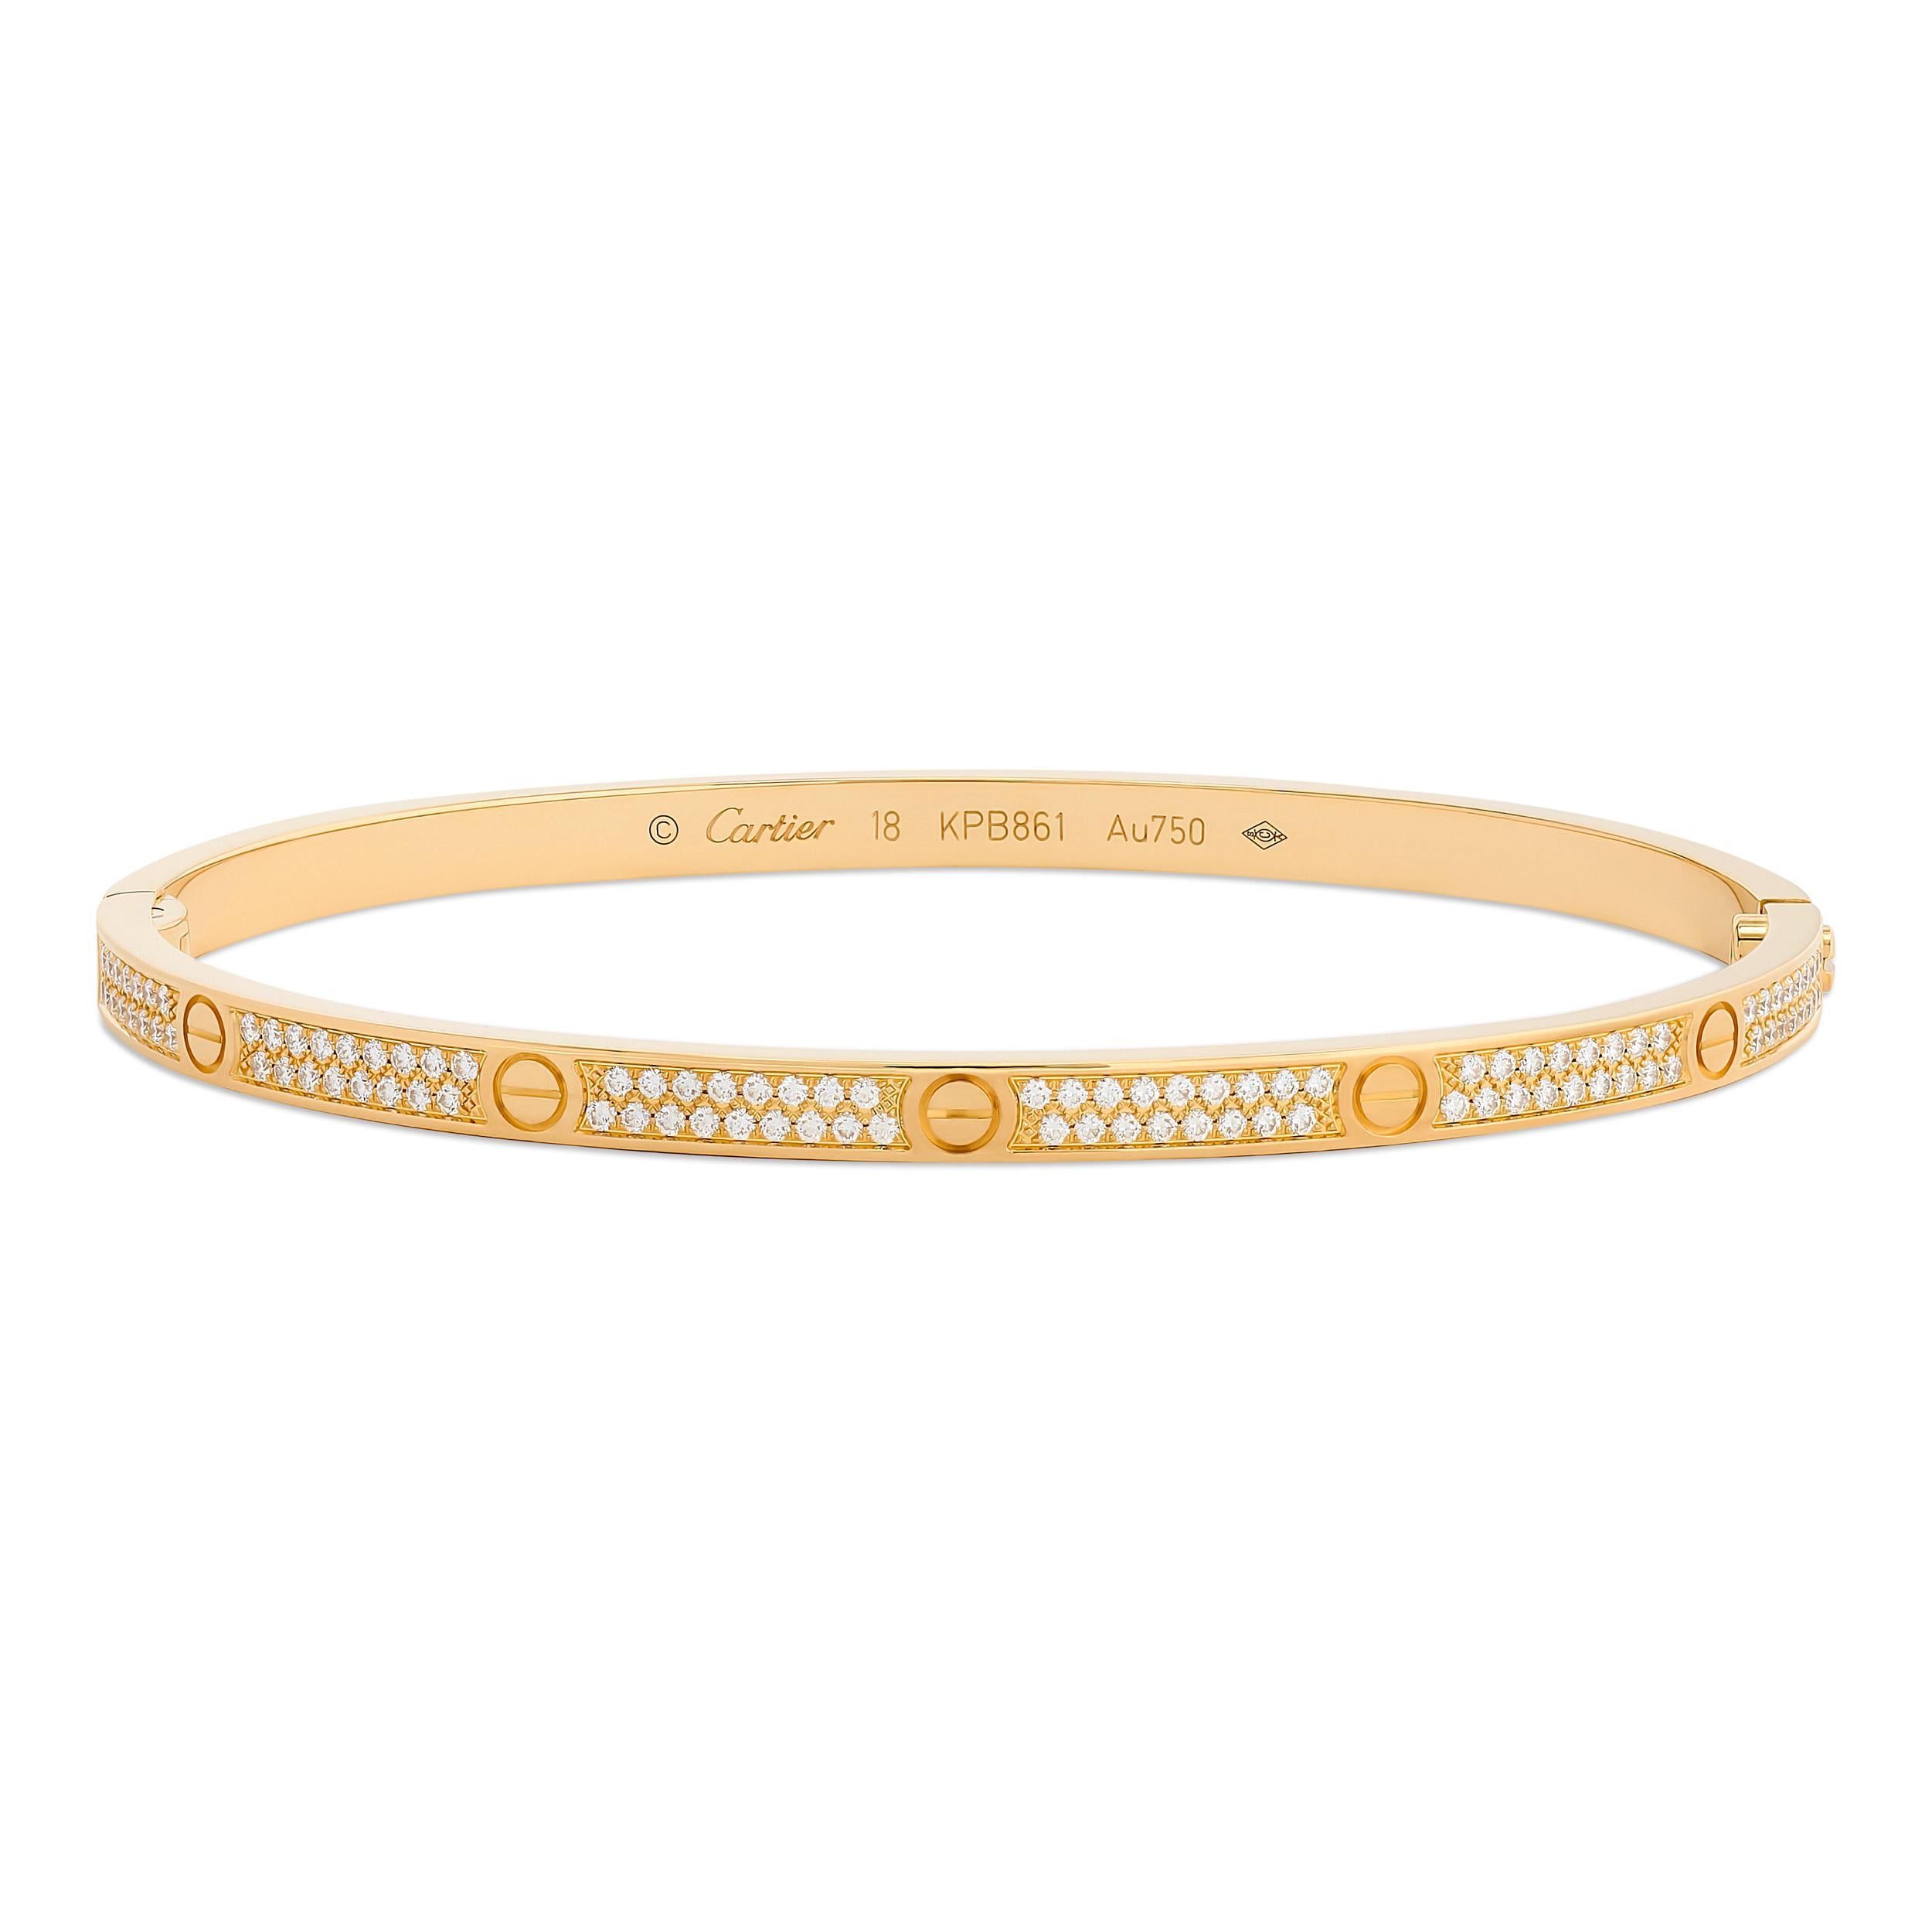 Cartier Pave Diamond Love Bracelet in 18k Yellow Gold with Box & Screwdriver For Sale